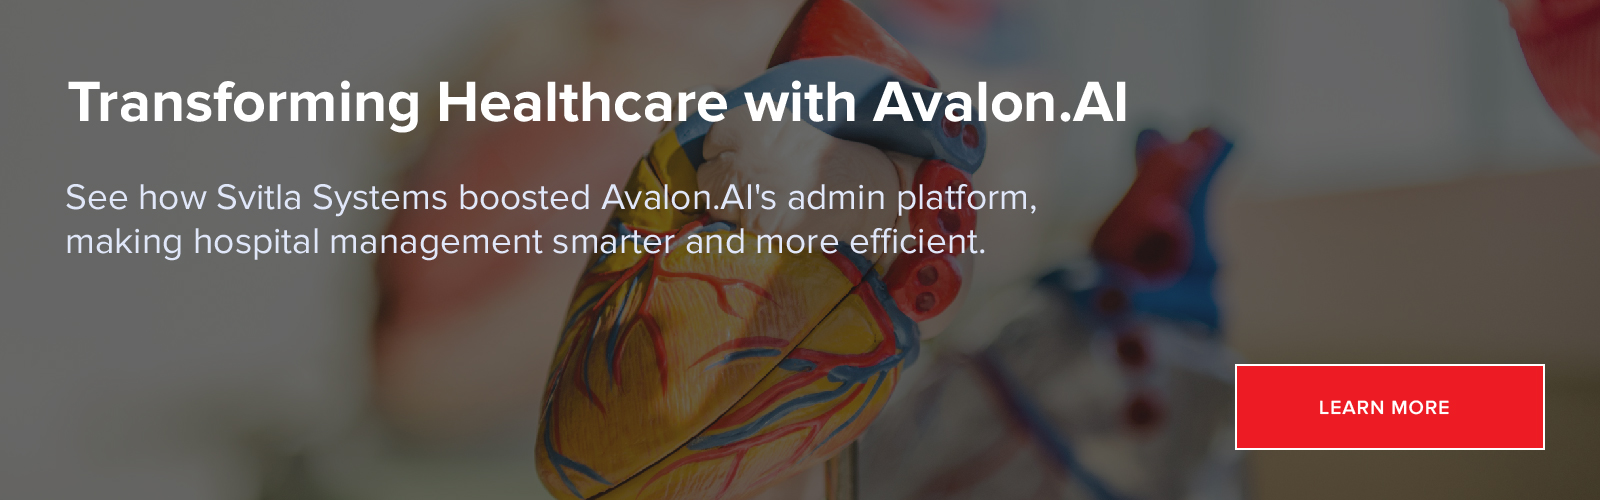 Transforming Healthcare with Avalon.AI